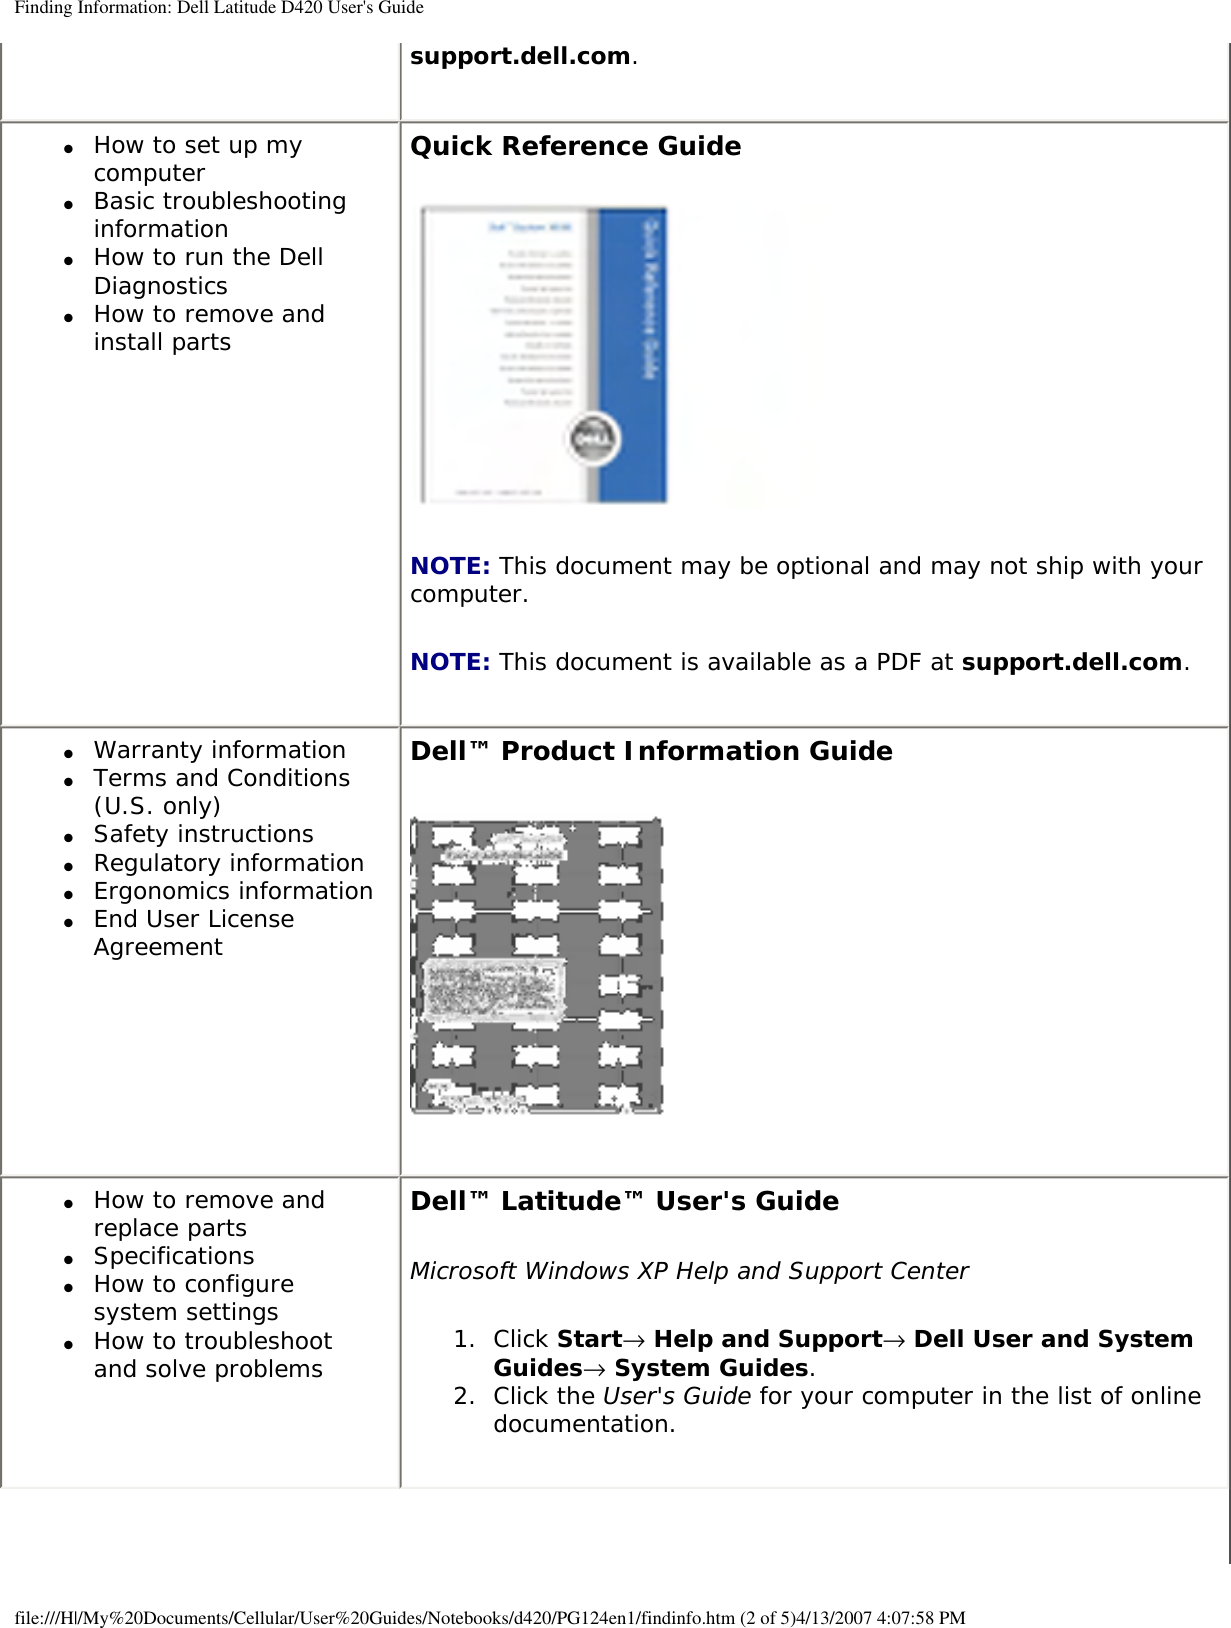 Finding Information: Dell Latitude D420 User&apos;s Guidesupport.dell.com.●     How to set up my computer●     Basic troubleshooting information●     How to run the Dell Diagnostics●     How to remove and install partsQuick Reference Guide NOTE: This document may be optional and may not ship with your computer.NOTE: This document is available as a PDF at support.dell.com.●     Warranty information●     Terms and Conditions (U.S. only)●     Safety instructions●     Regulatory information●     Ergonomics information●     End User License AgreementDell™ Product Information Guide ●     How to remove and replace parts●     Specifications●     How to configure system settings●     How to troubleshoot and solve problemsDell™ Latitude™ User&apos;s GuideMicrosoft Windows XP Help and Support Center1.  Click Start→ Help and Support→ Dell User and System Guides→ System Guides. 2.  Click the User&apos;s Guide for your computer in the list of online documentation. file:///H|/My%20Documents/Cellular/User%20Guides/Notebooks/d420/PG124en1/findinfo.htm (2 of 5)4/13/2007 4:07:58 PM